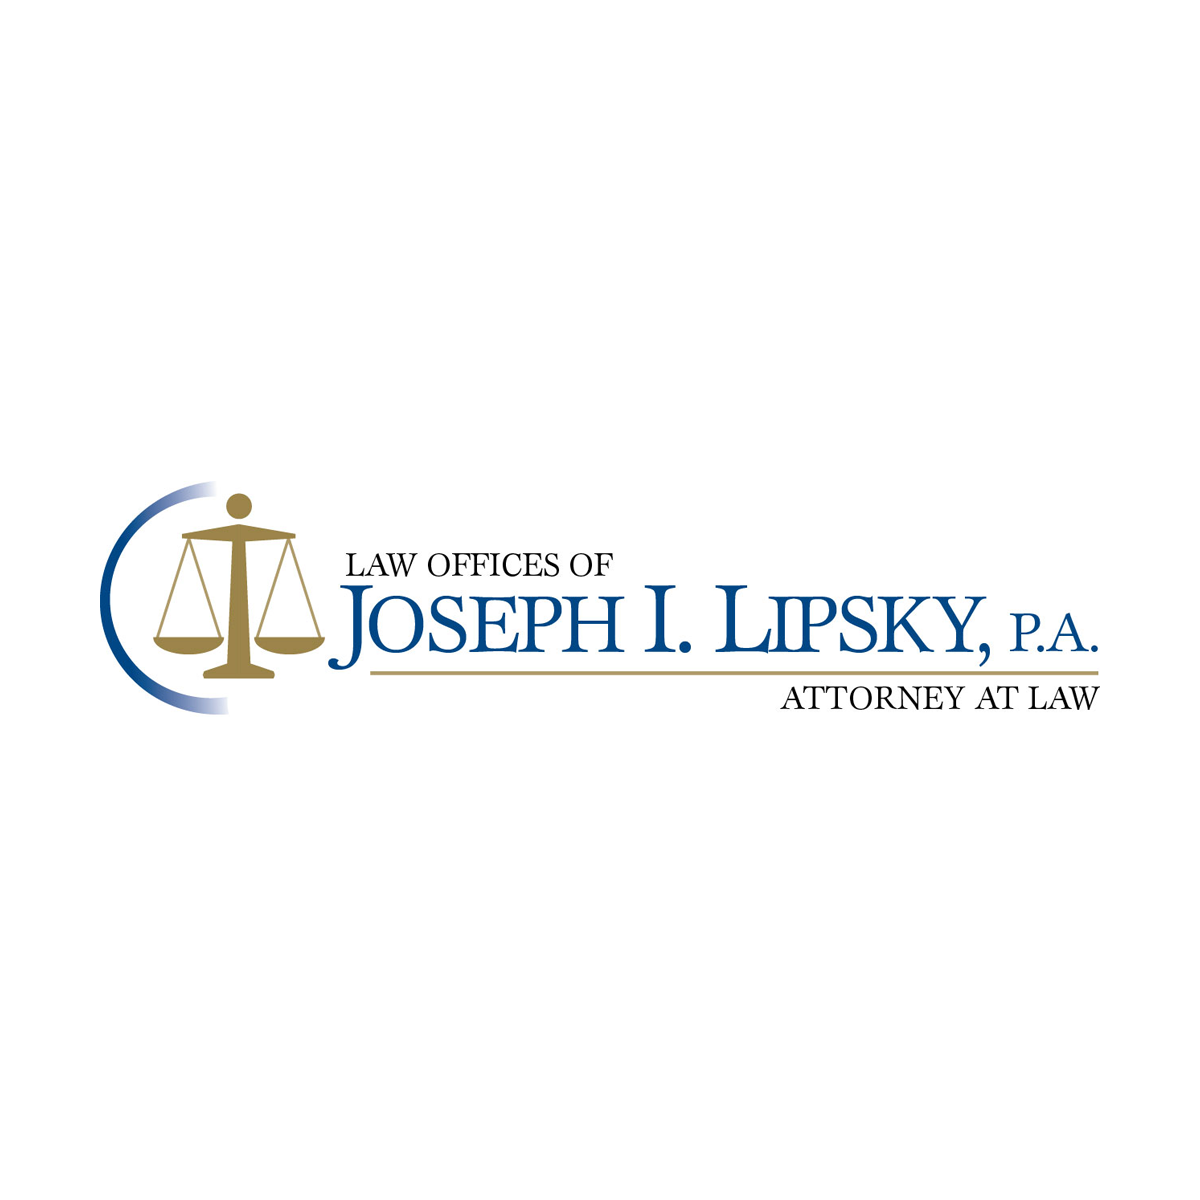 Insurance Companies Should Increase Refunds with Drop in Florida Vehicle Traffic — Florida Personal Injury Lawyer Blog — July 11, 2020